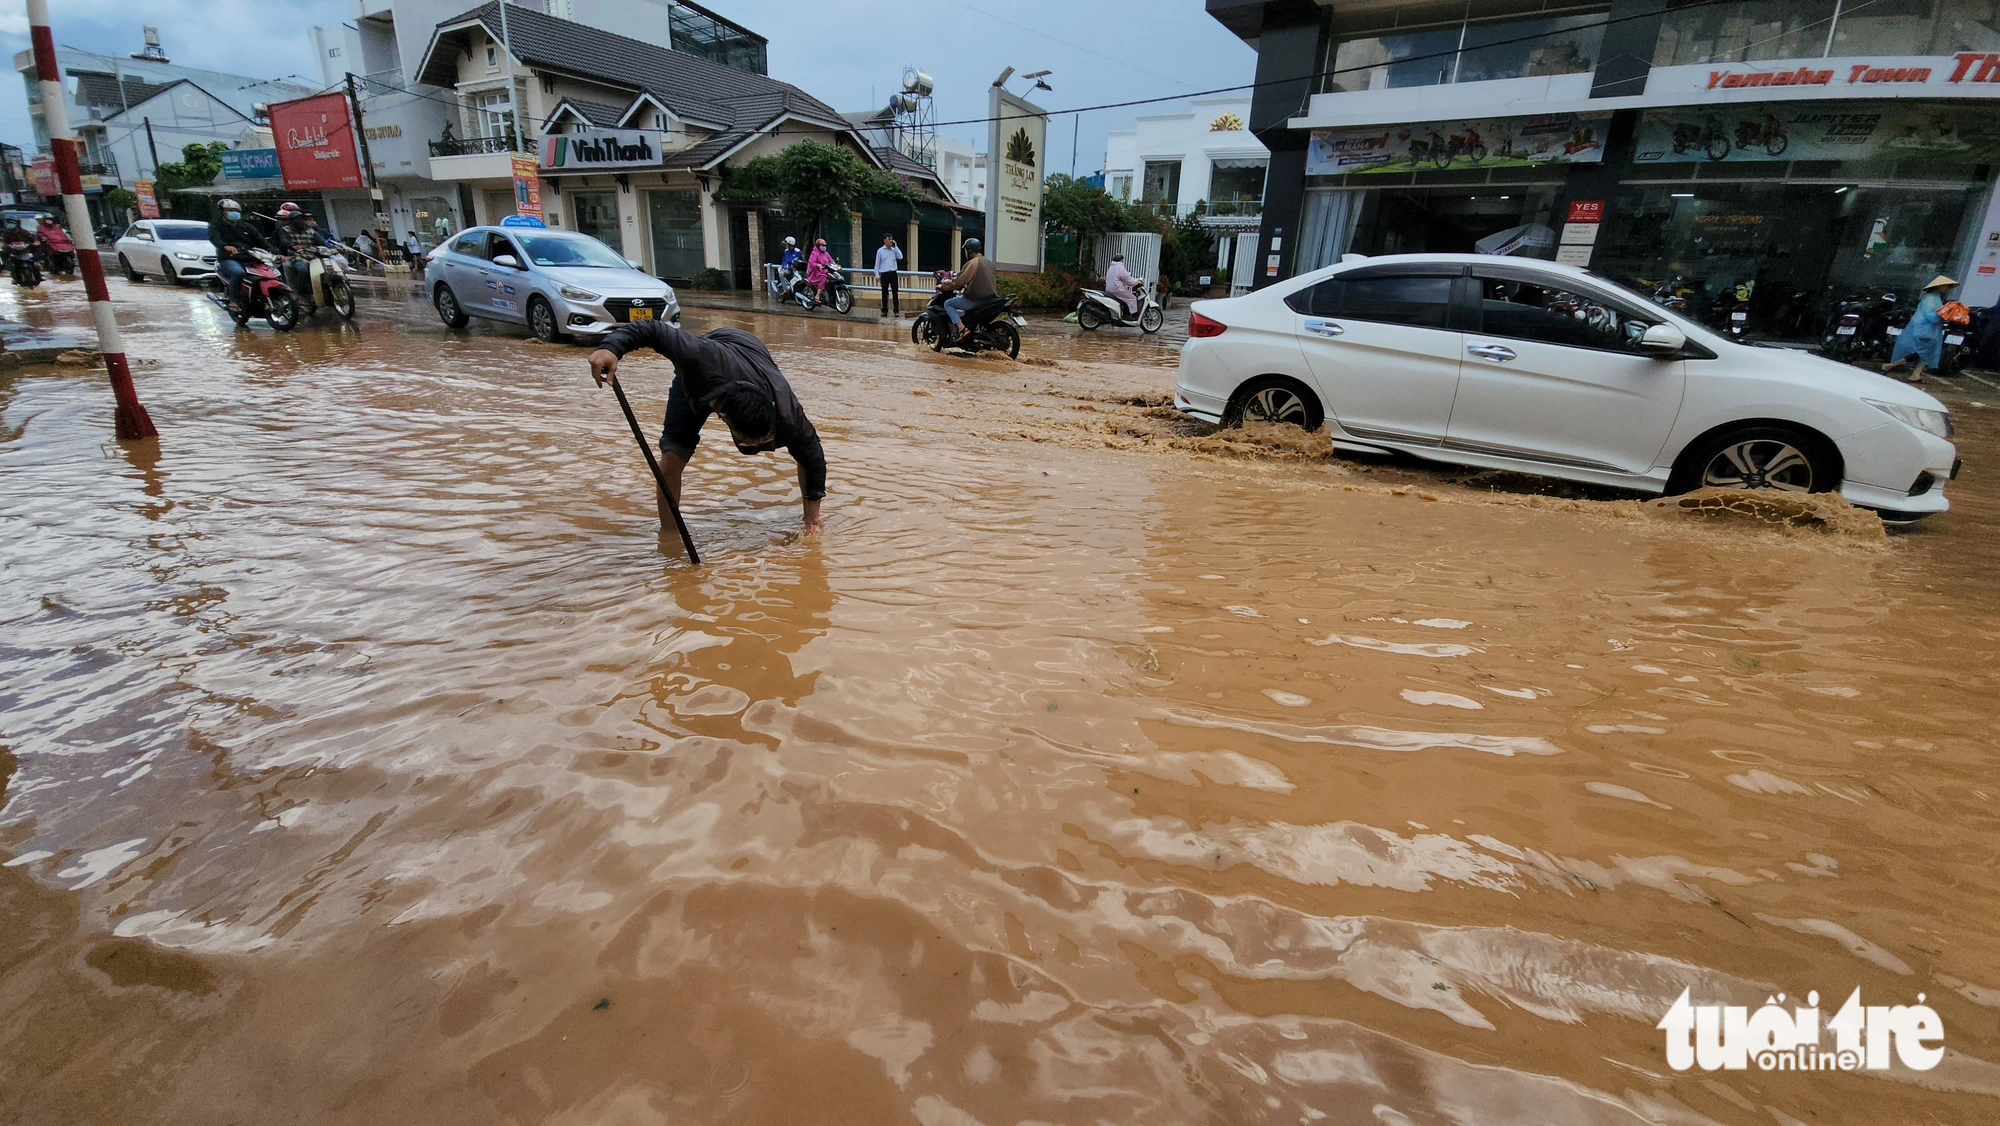 A local man clears a drainage hole on flooded Phan Dinh Phung Street in Da Lat City, located in Vietnam’s Lam Dong Province on June 23, 2023. Photo: M.V. / Tuoi Tre